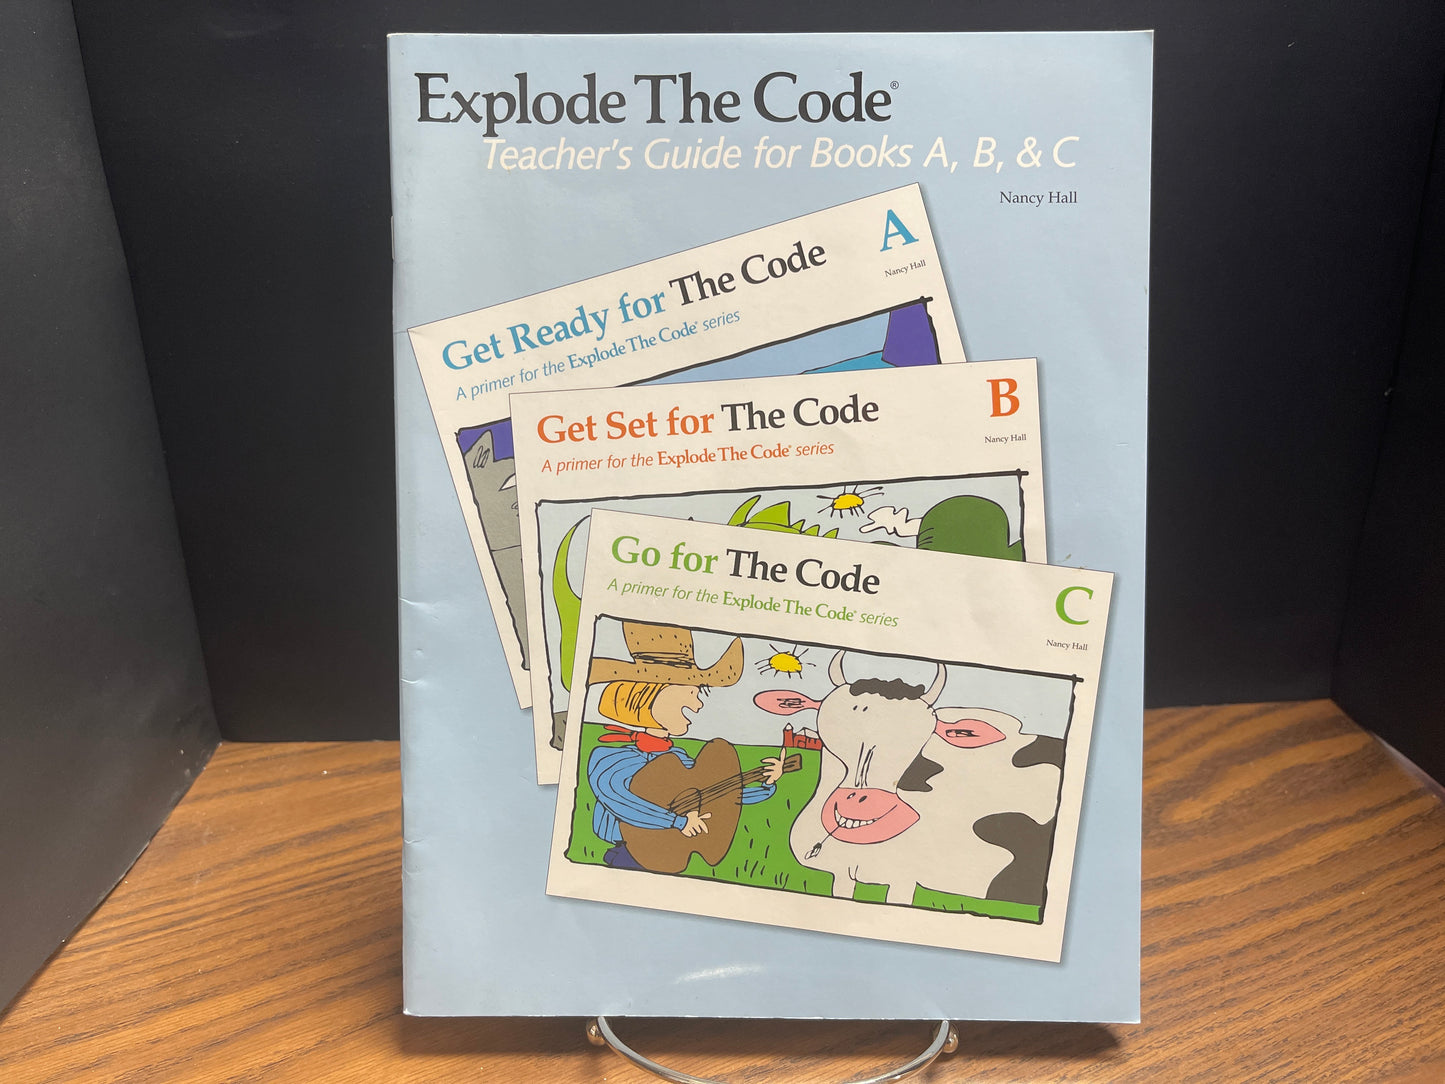 Explode the Code teacher's guide for books A,B, & C second ed